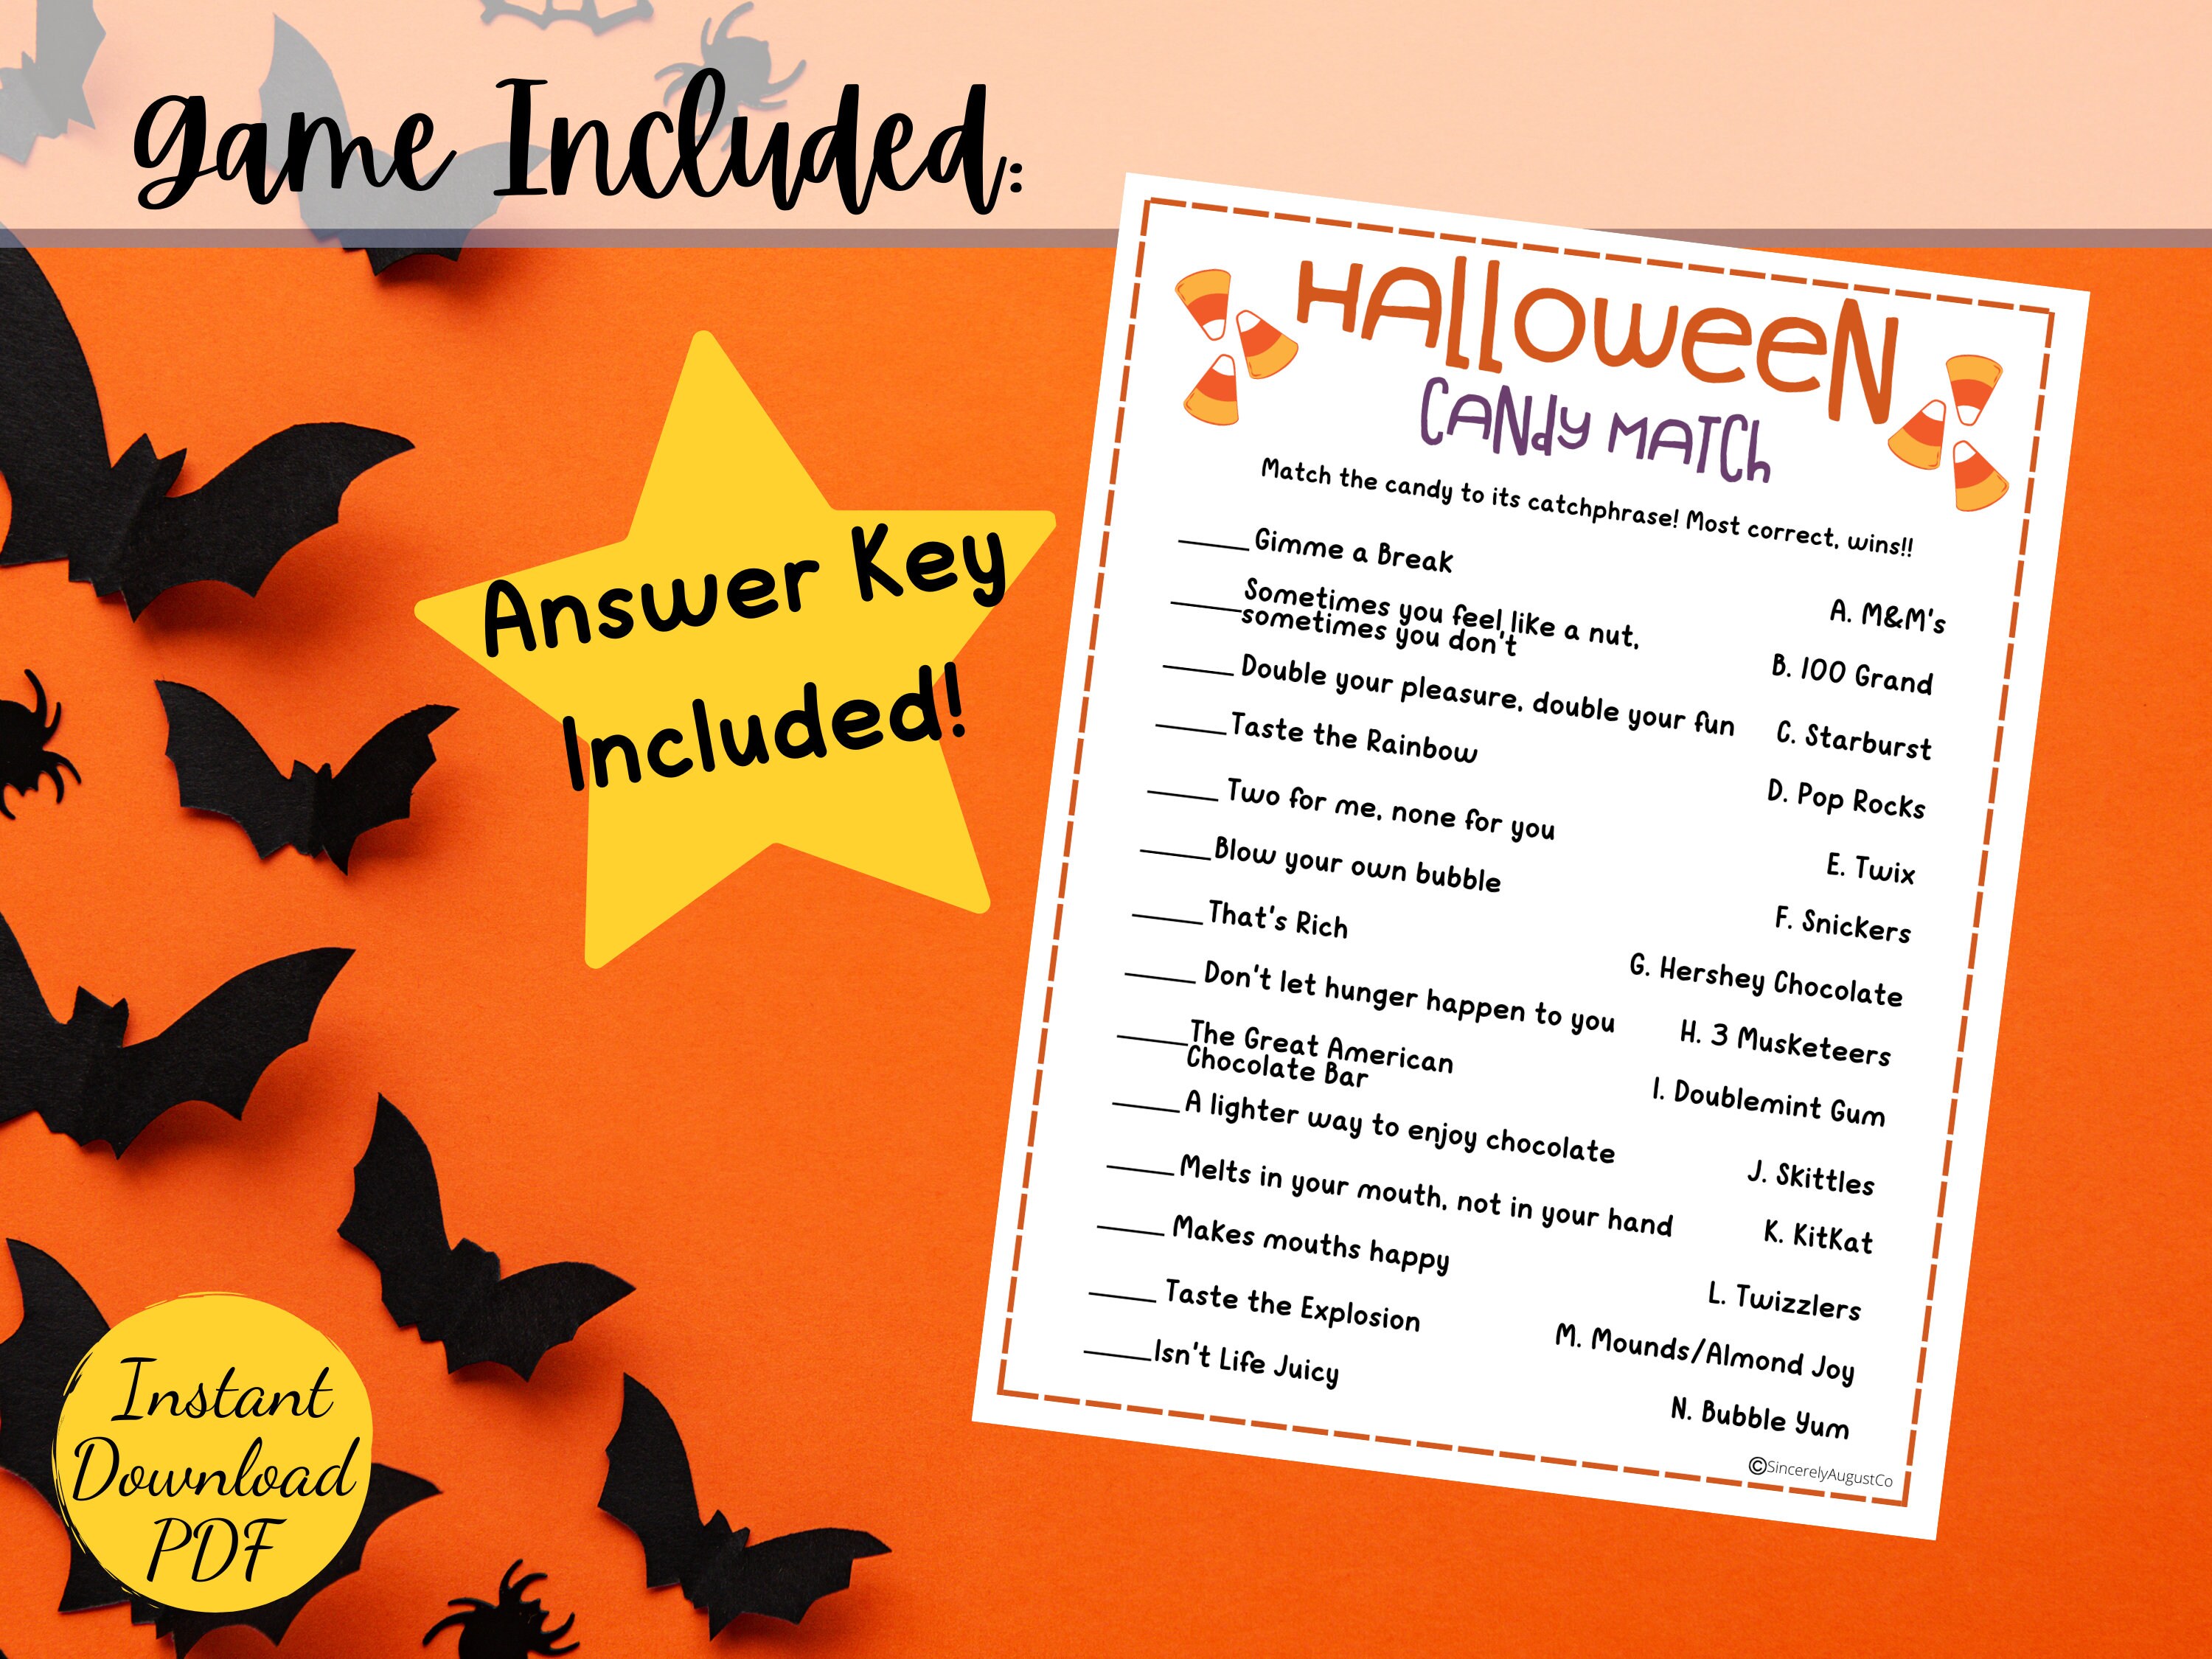 Halloween CANDY MATCH Halloween Party Game Printable - Etsy